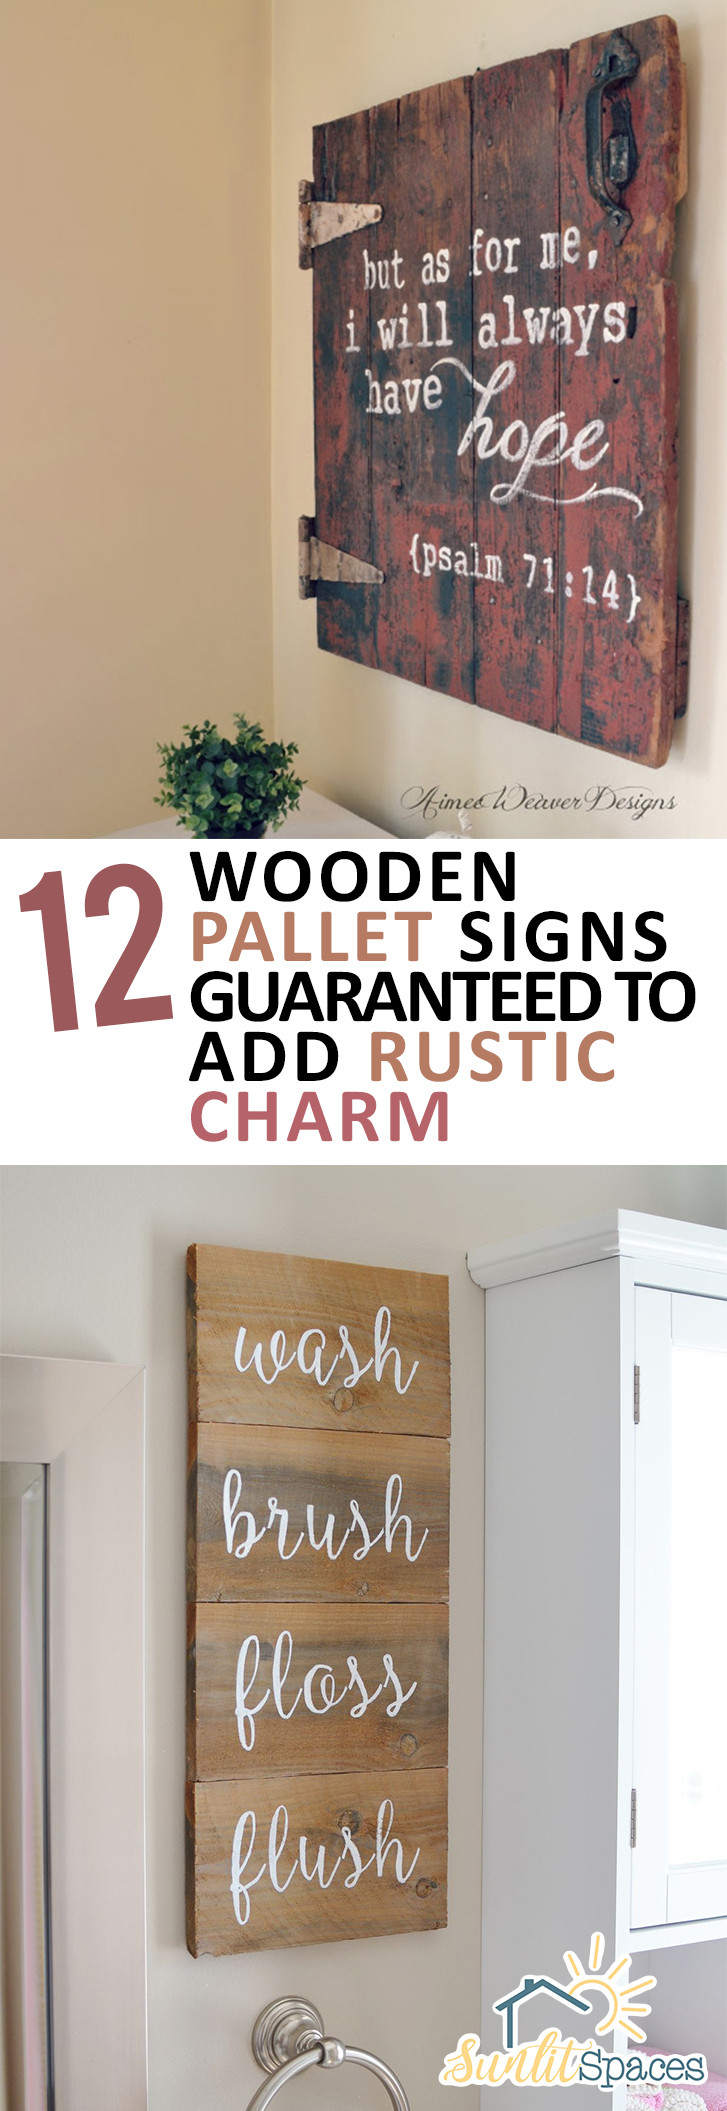 DIY Wood Sign Ideas
 12 Wooden Pallet Signs Guaranteed to Add Rustic Charm